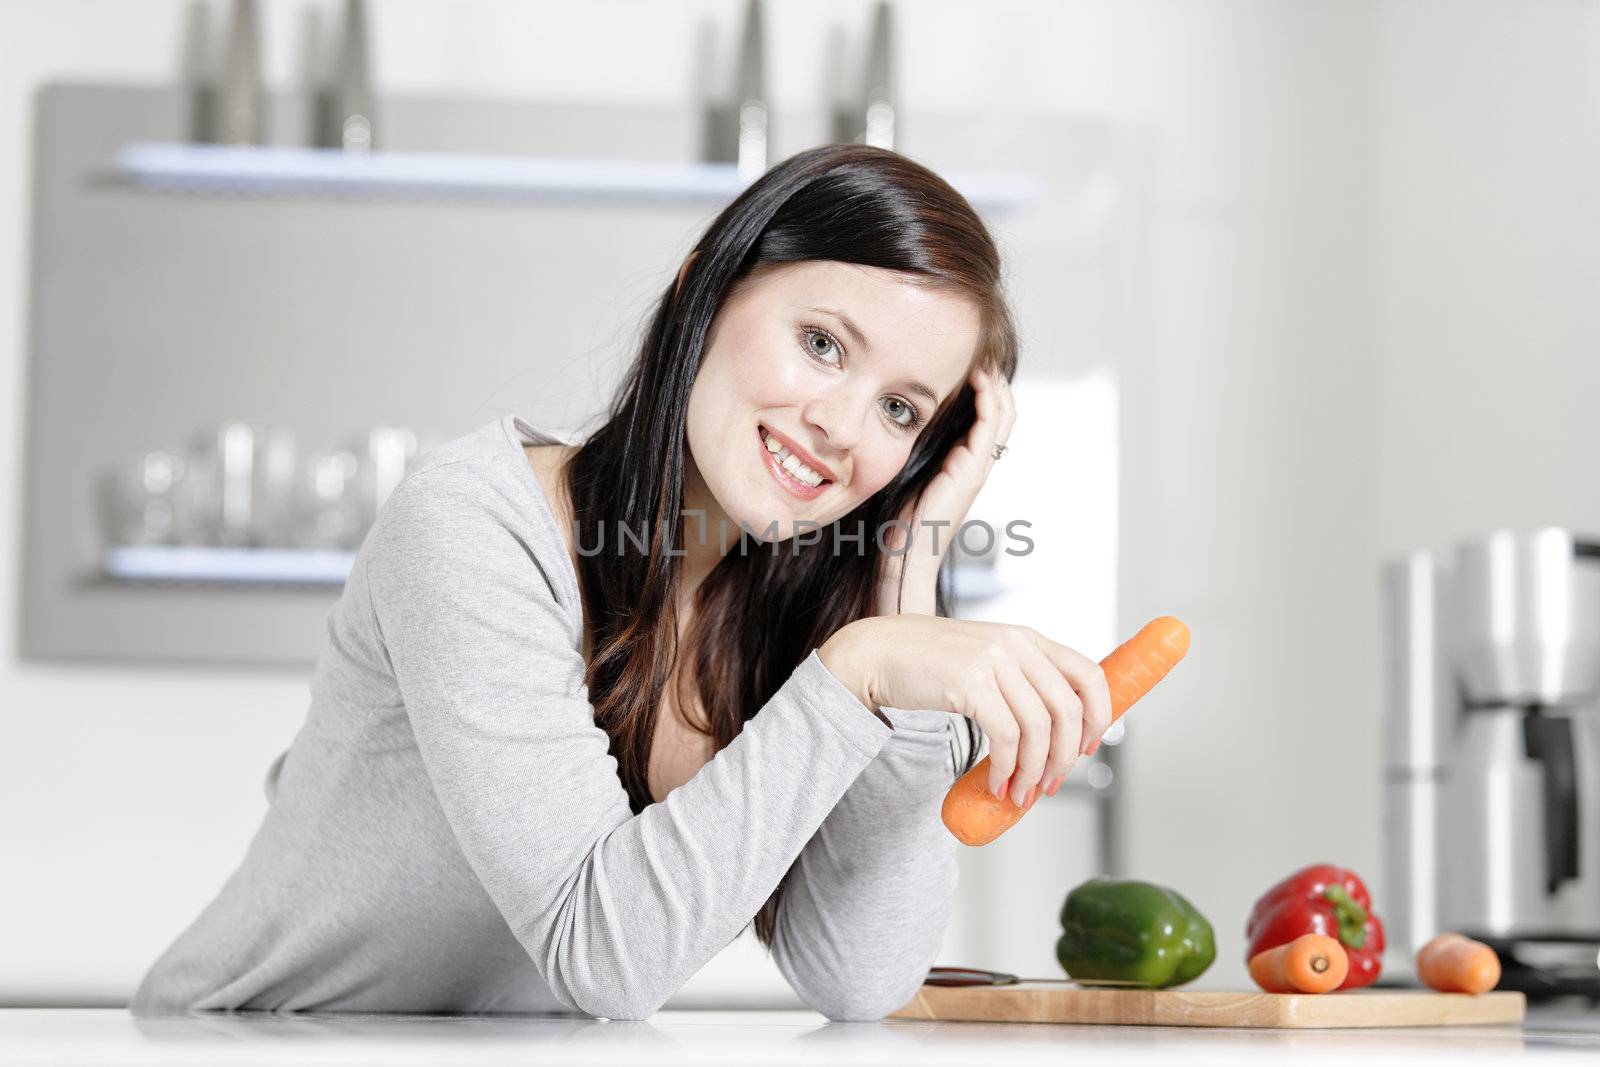 Attractive young woman in her elegant kitchen with fresh vegetables ready to cook.